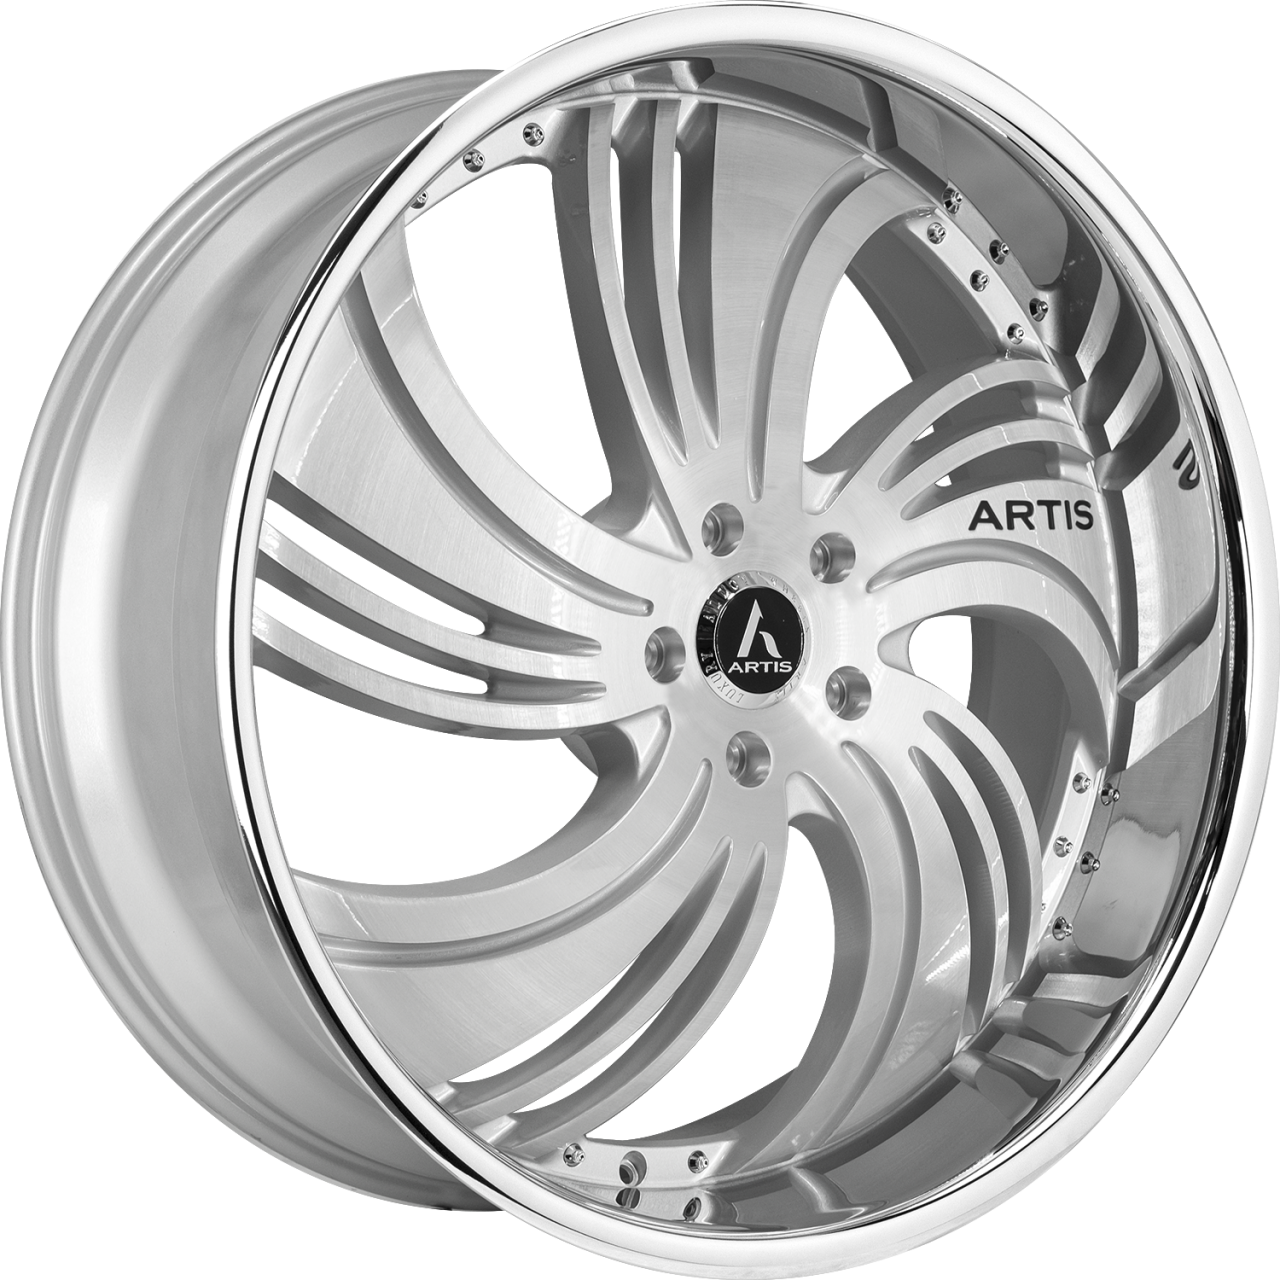 Artis Forged Avenue wheel with Silver and Machined finish